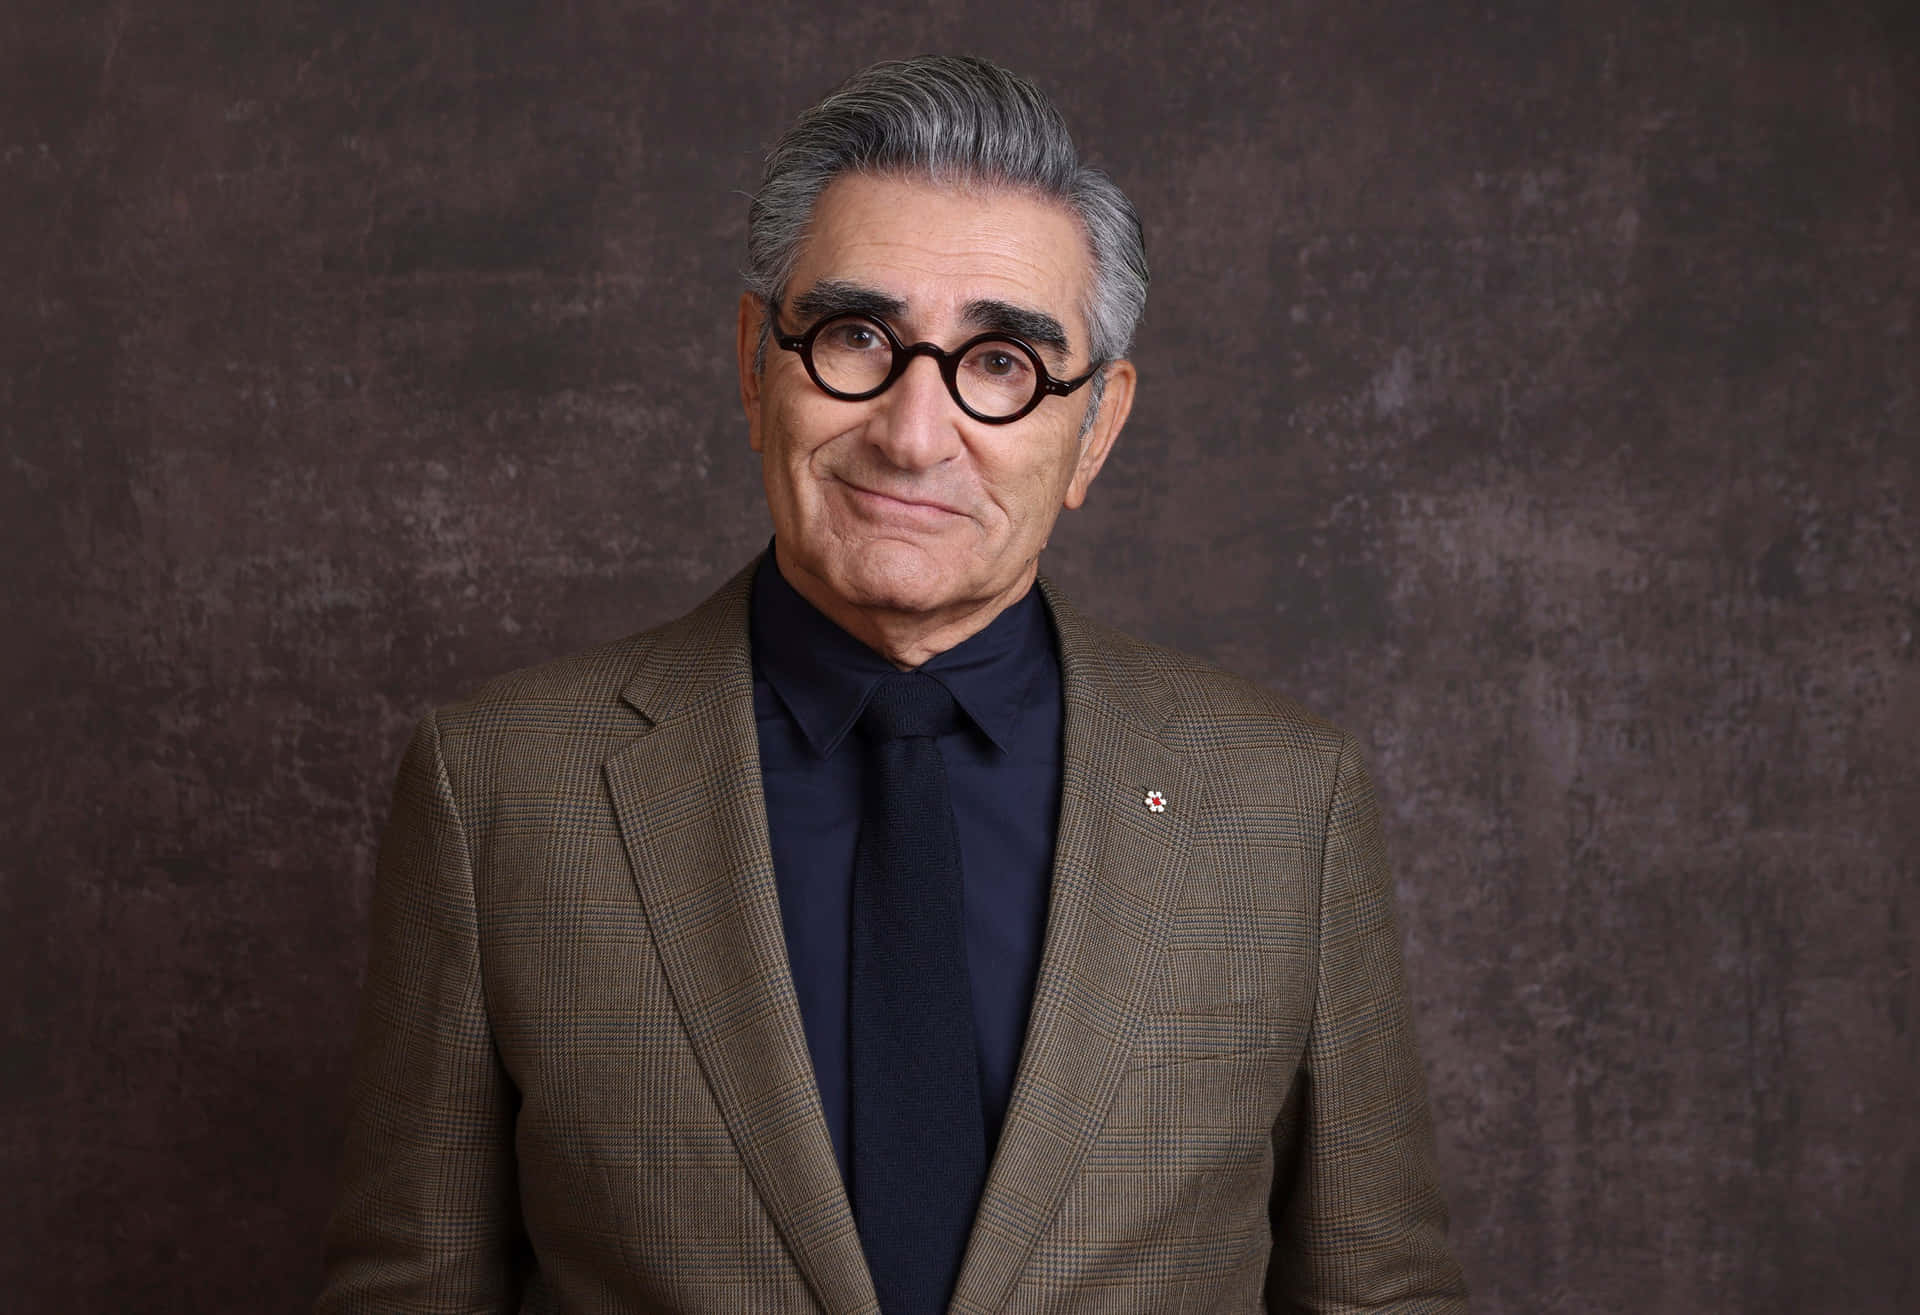 [100+] Eugene Levy Wallpapers | Wallpapers.com